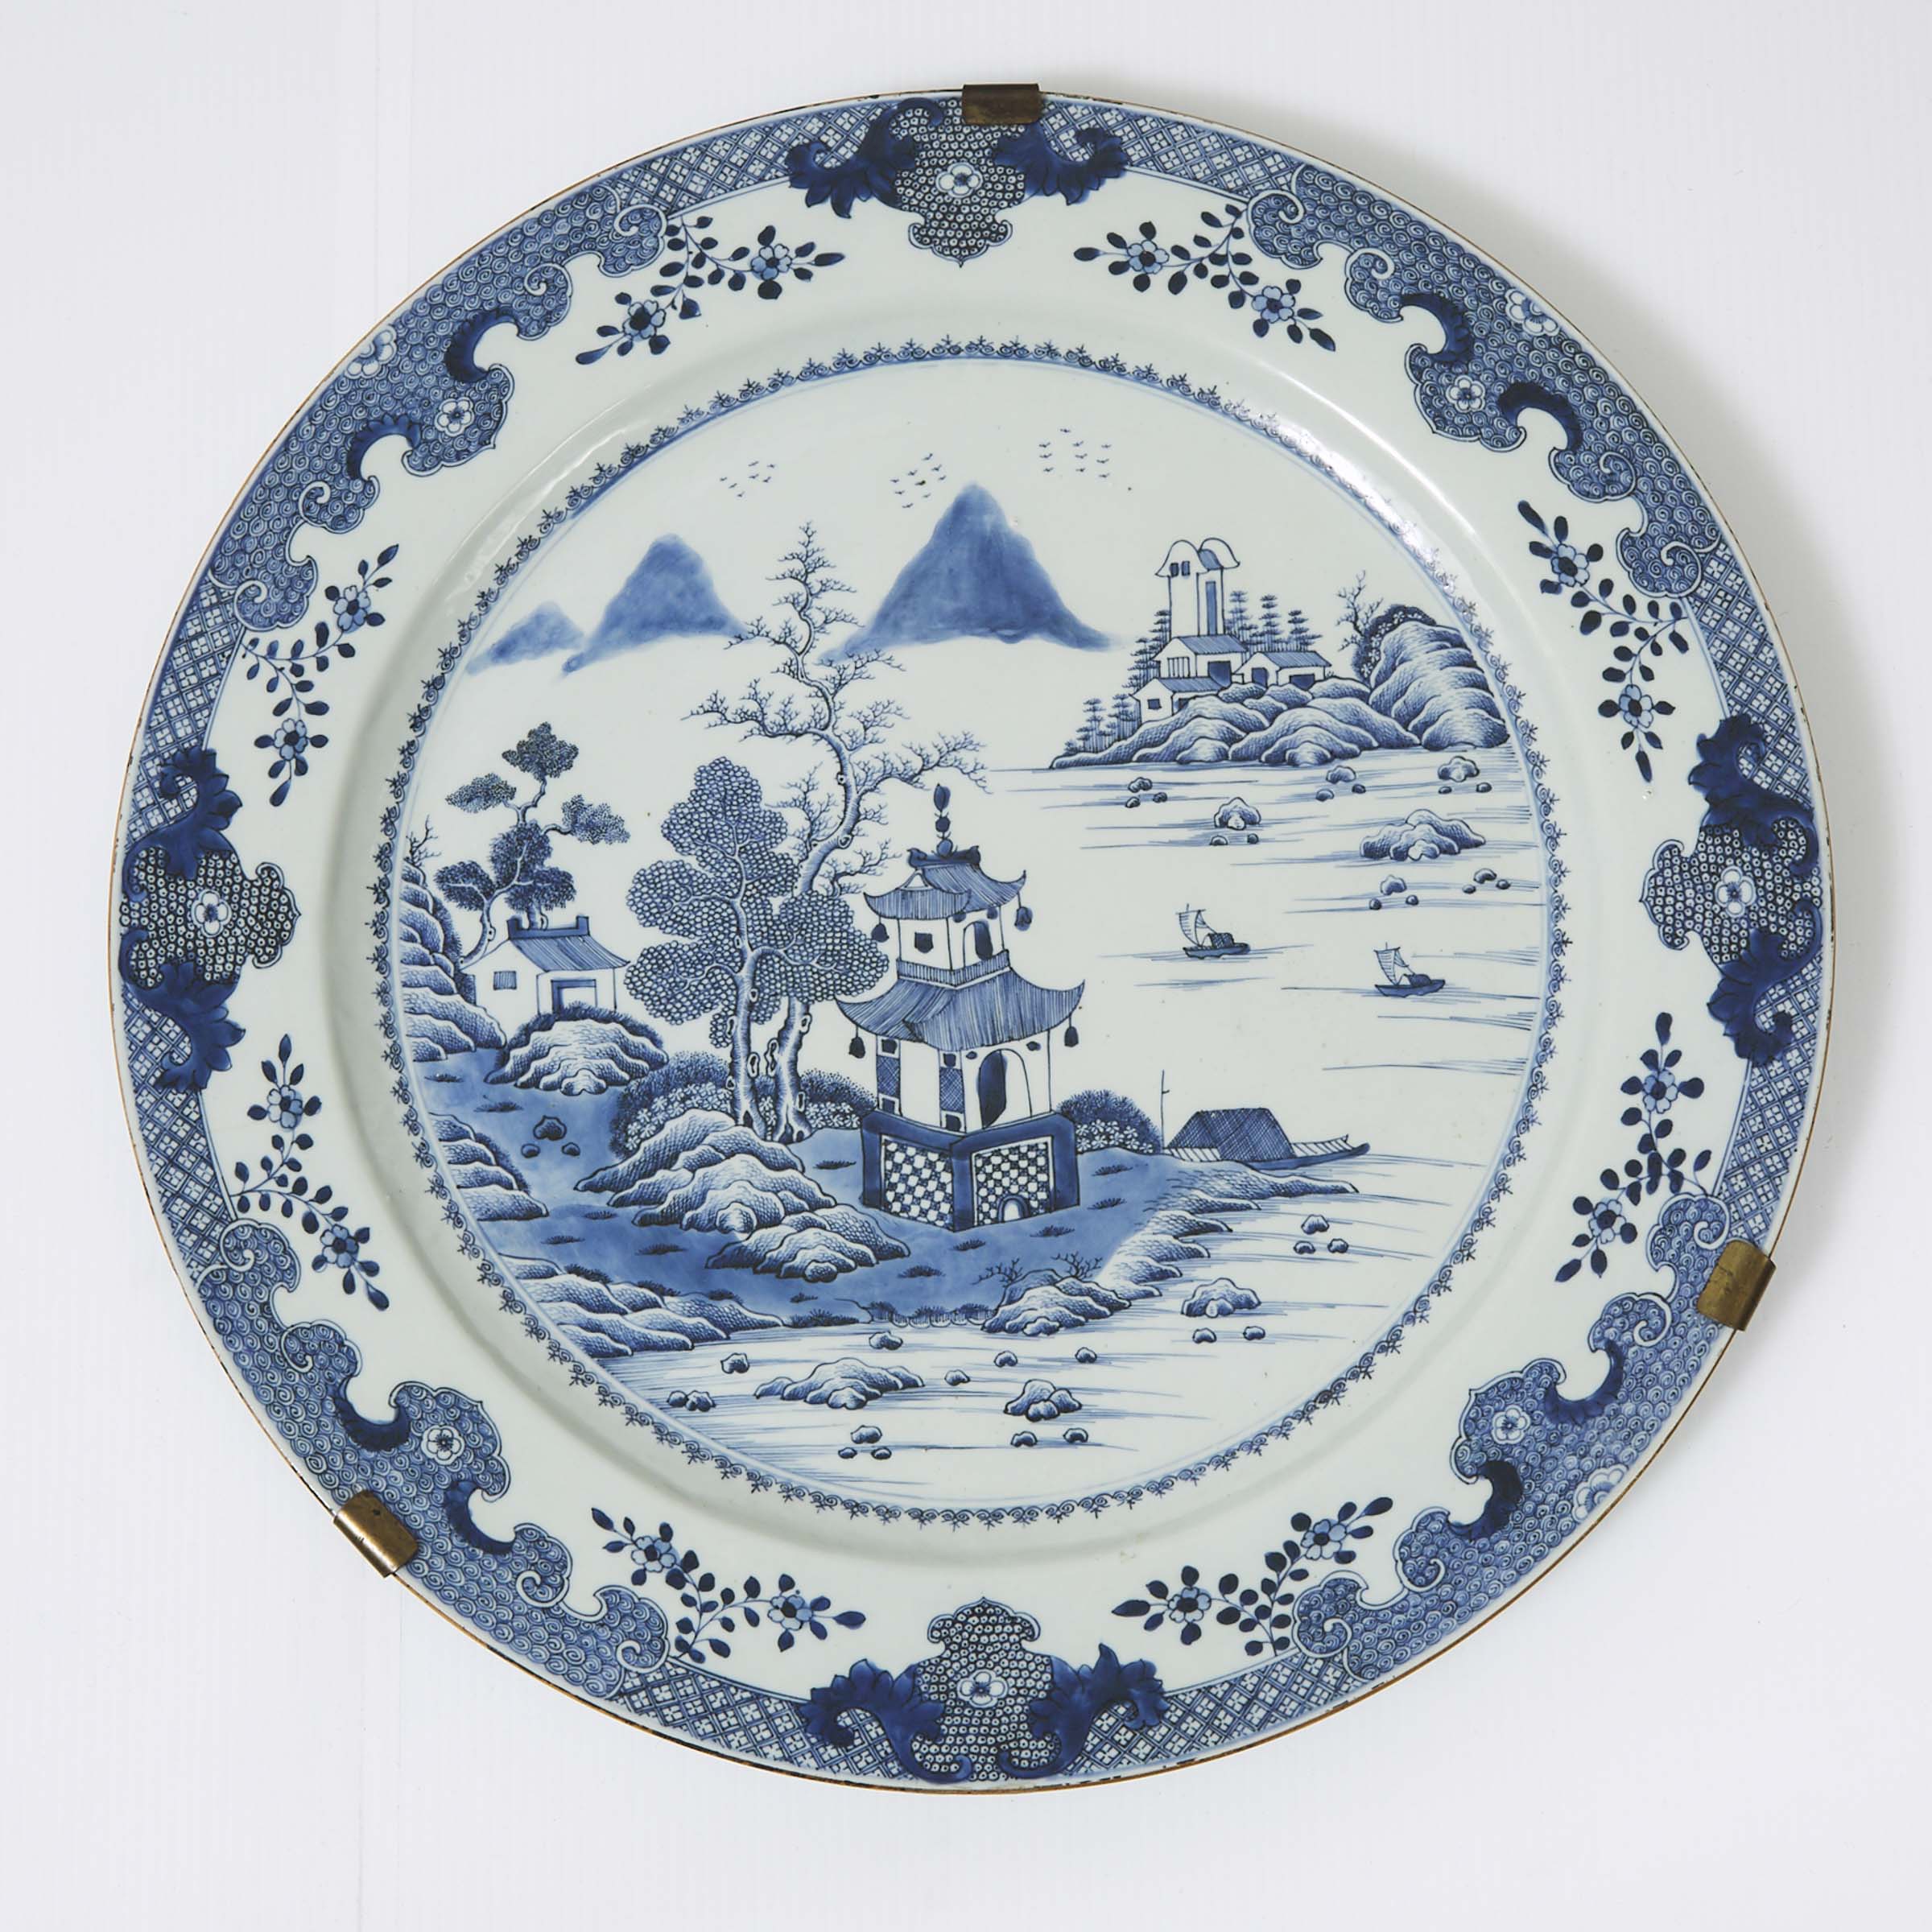 A Massive Blue and White 'Landscape' Charger, 18th Century